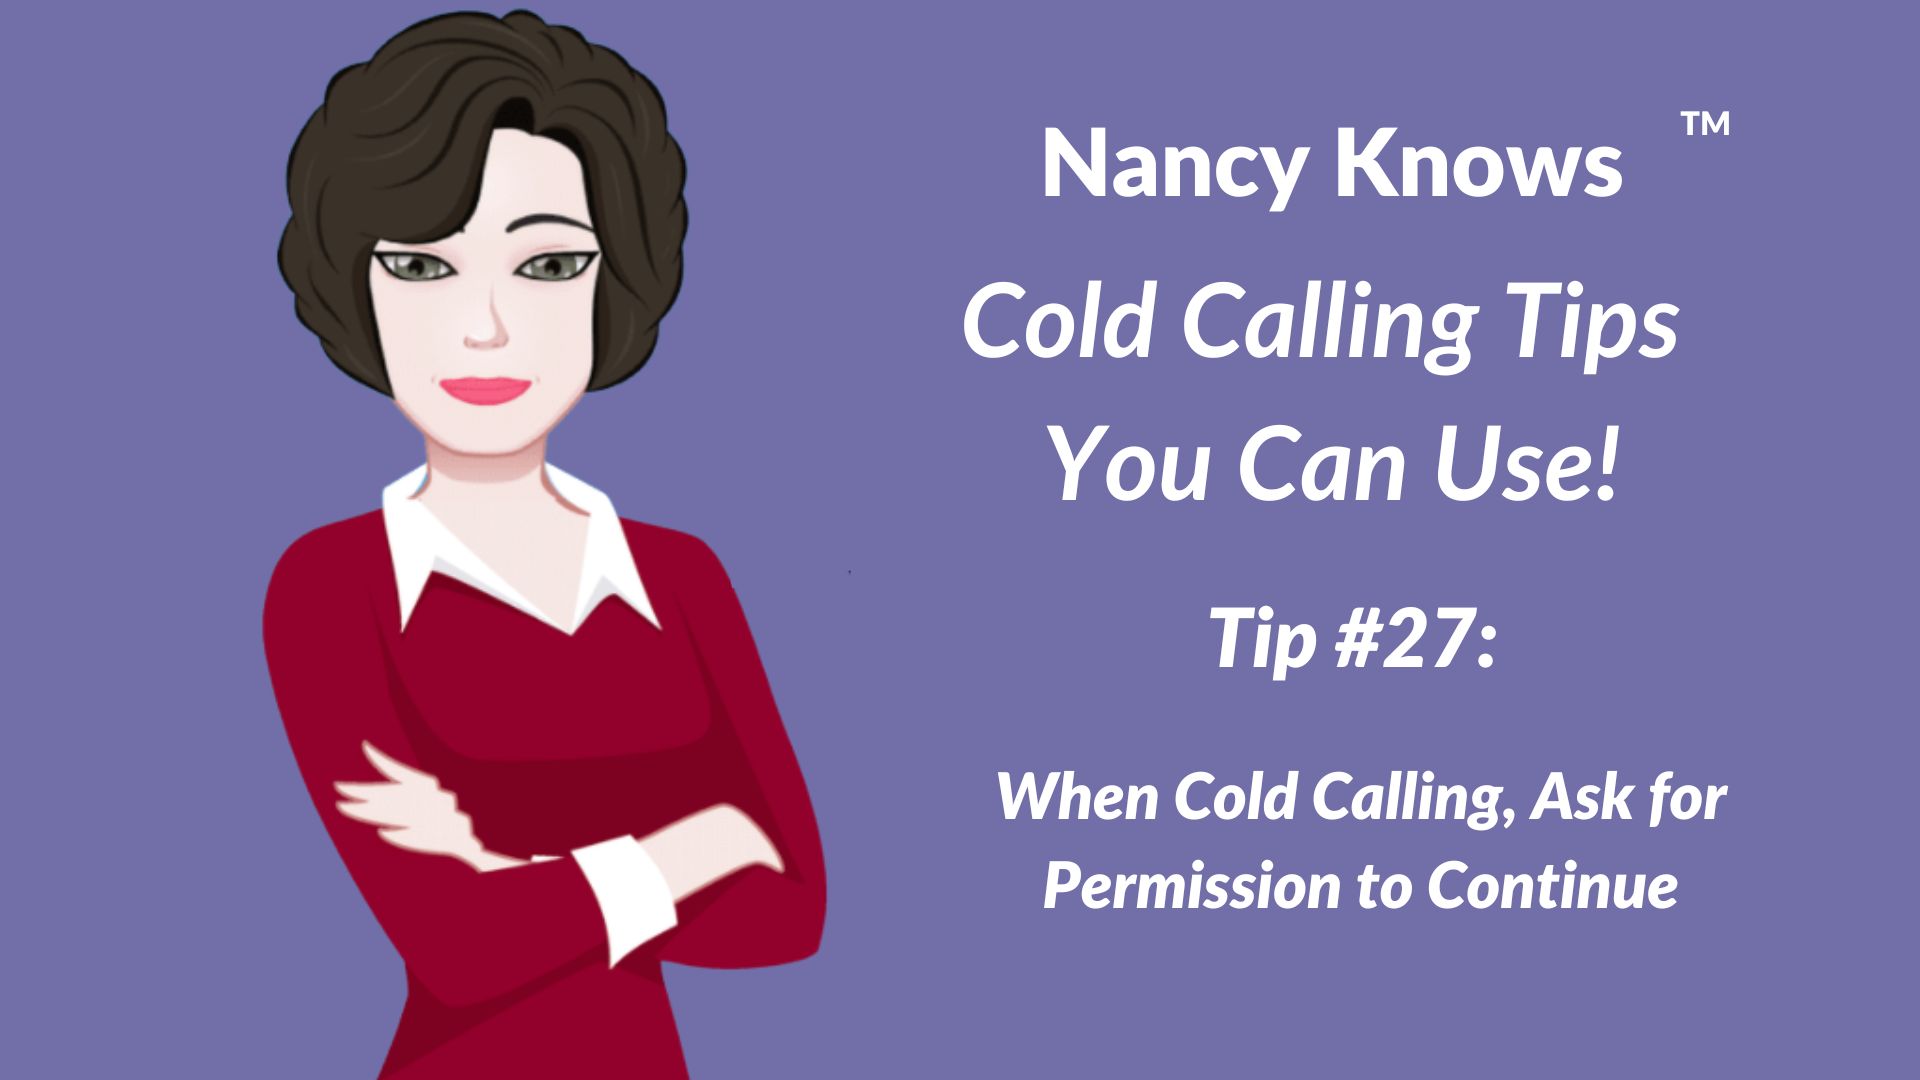 Nancy Knows #27: Always ask for permission to continue